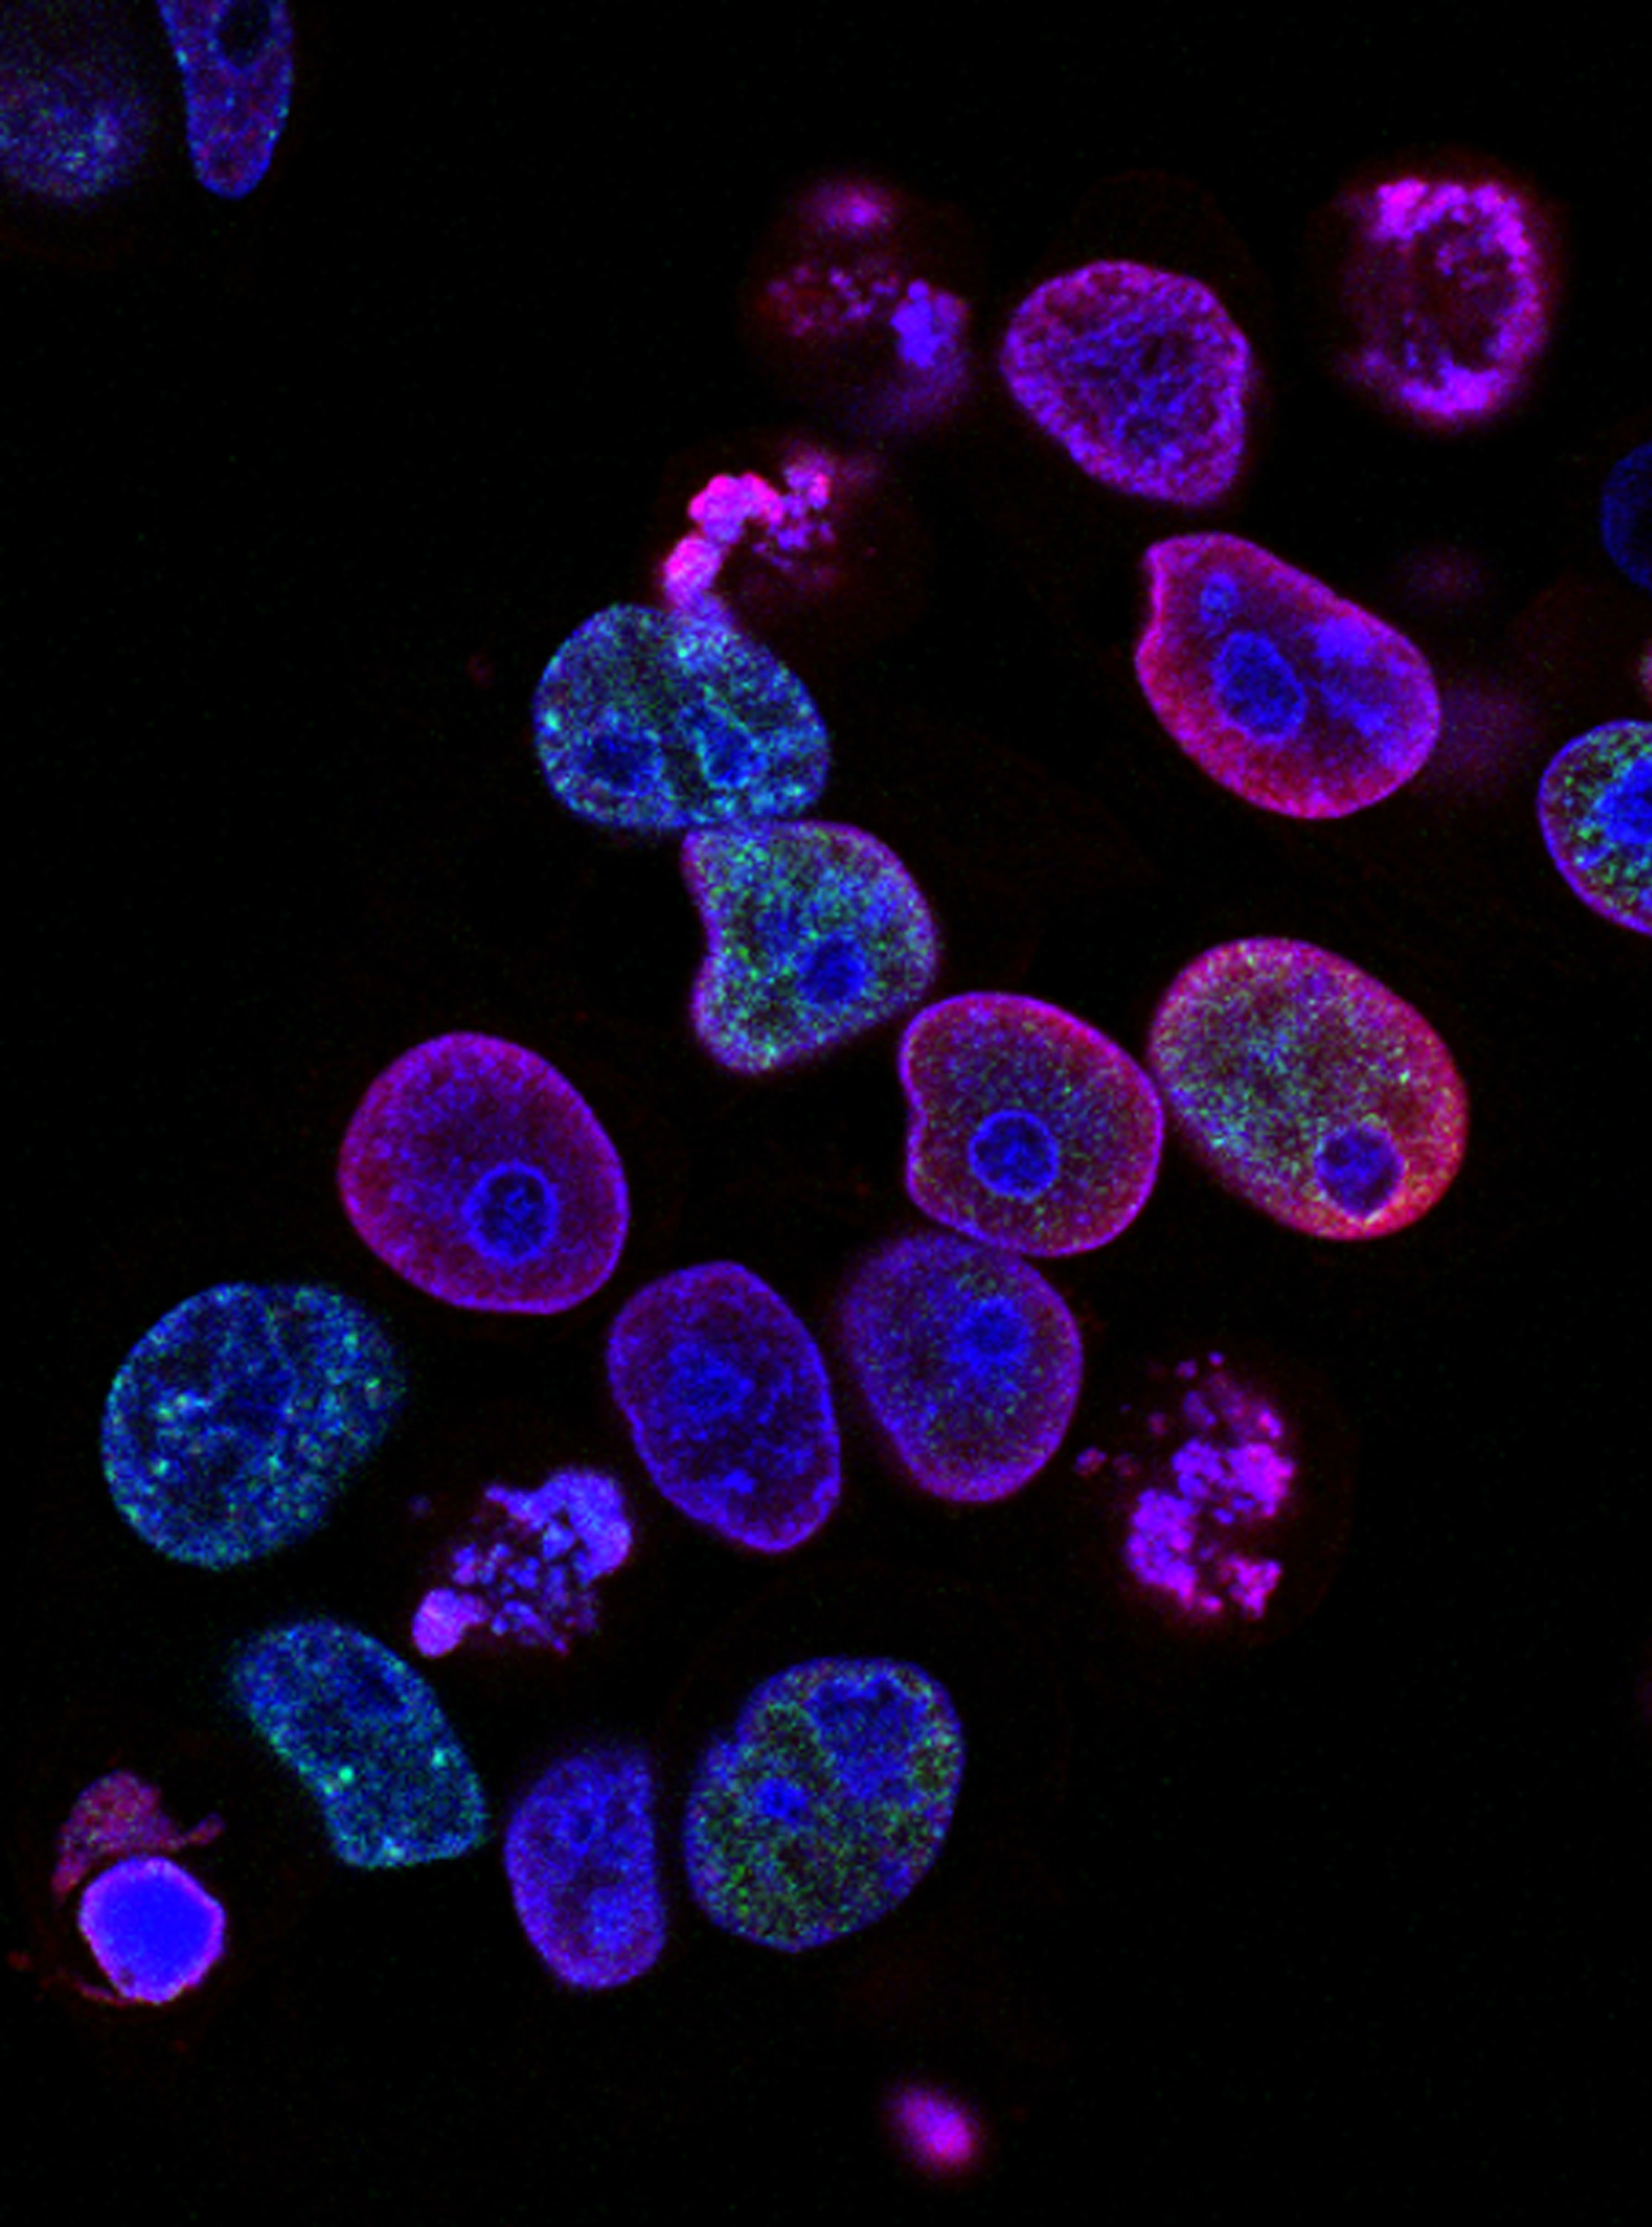 An image of colorectal cancer cells